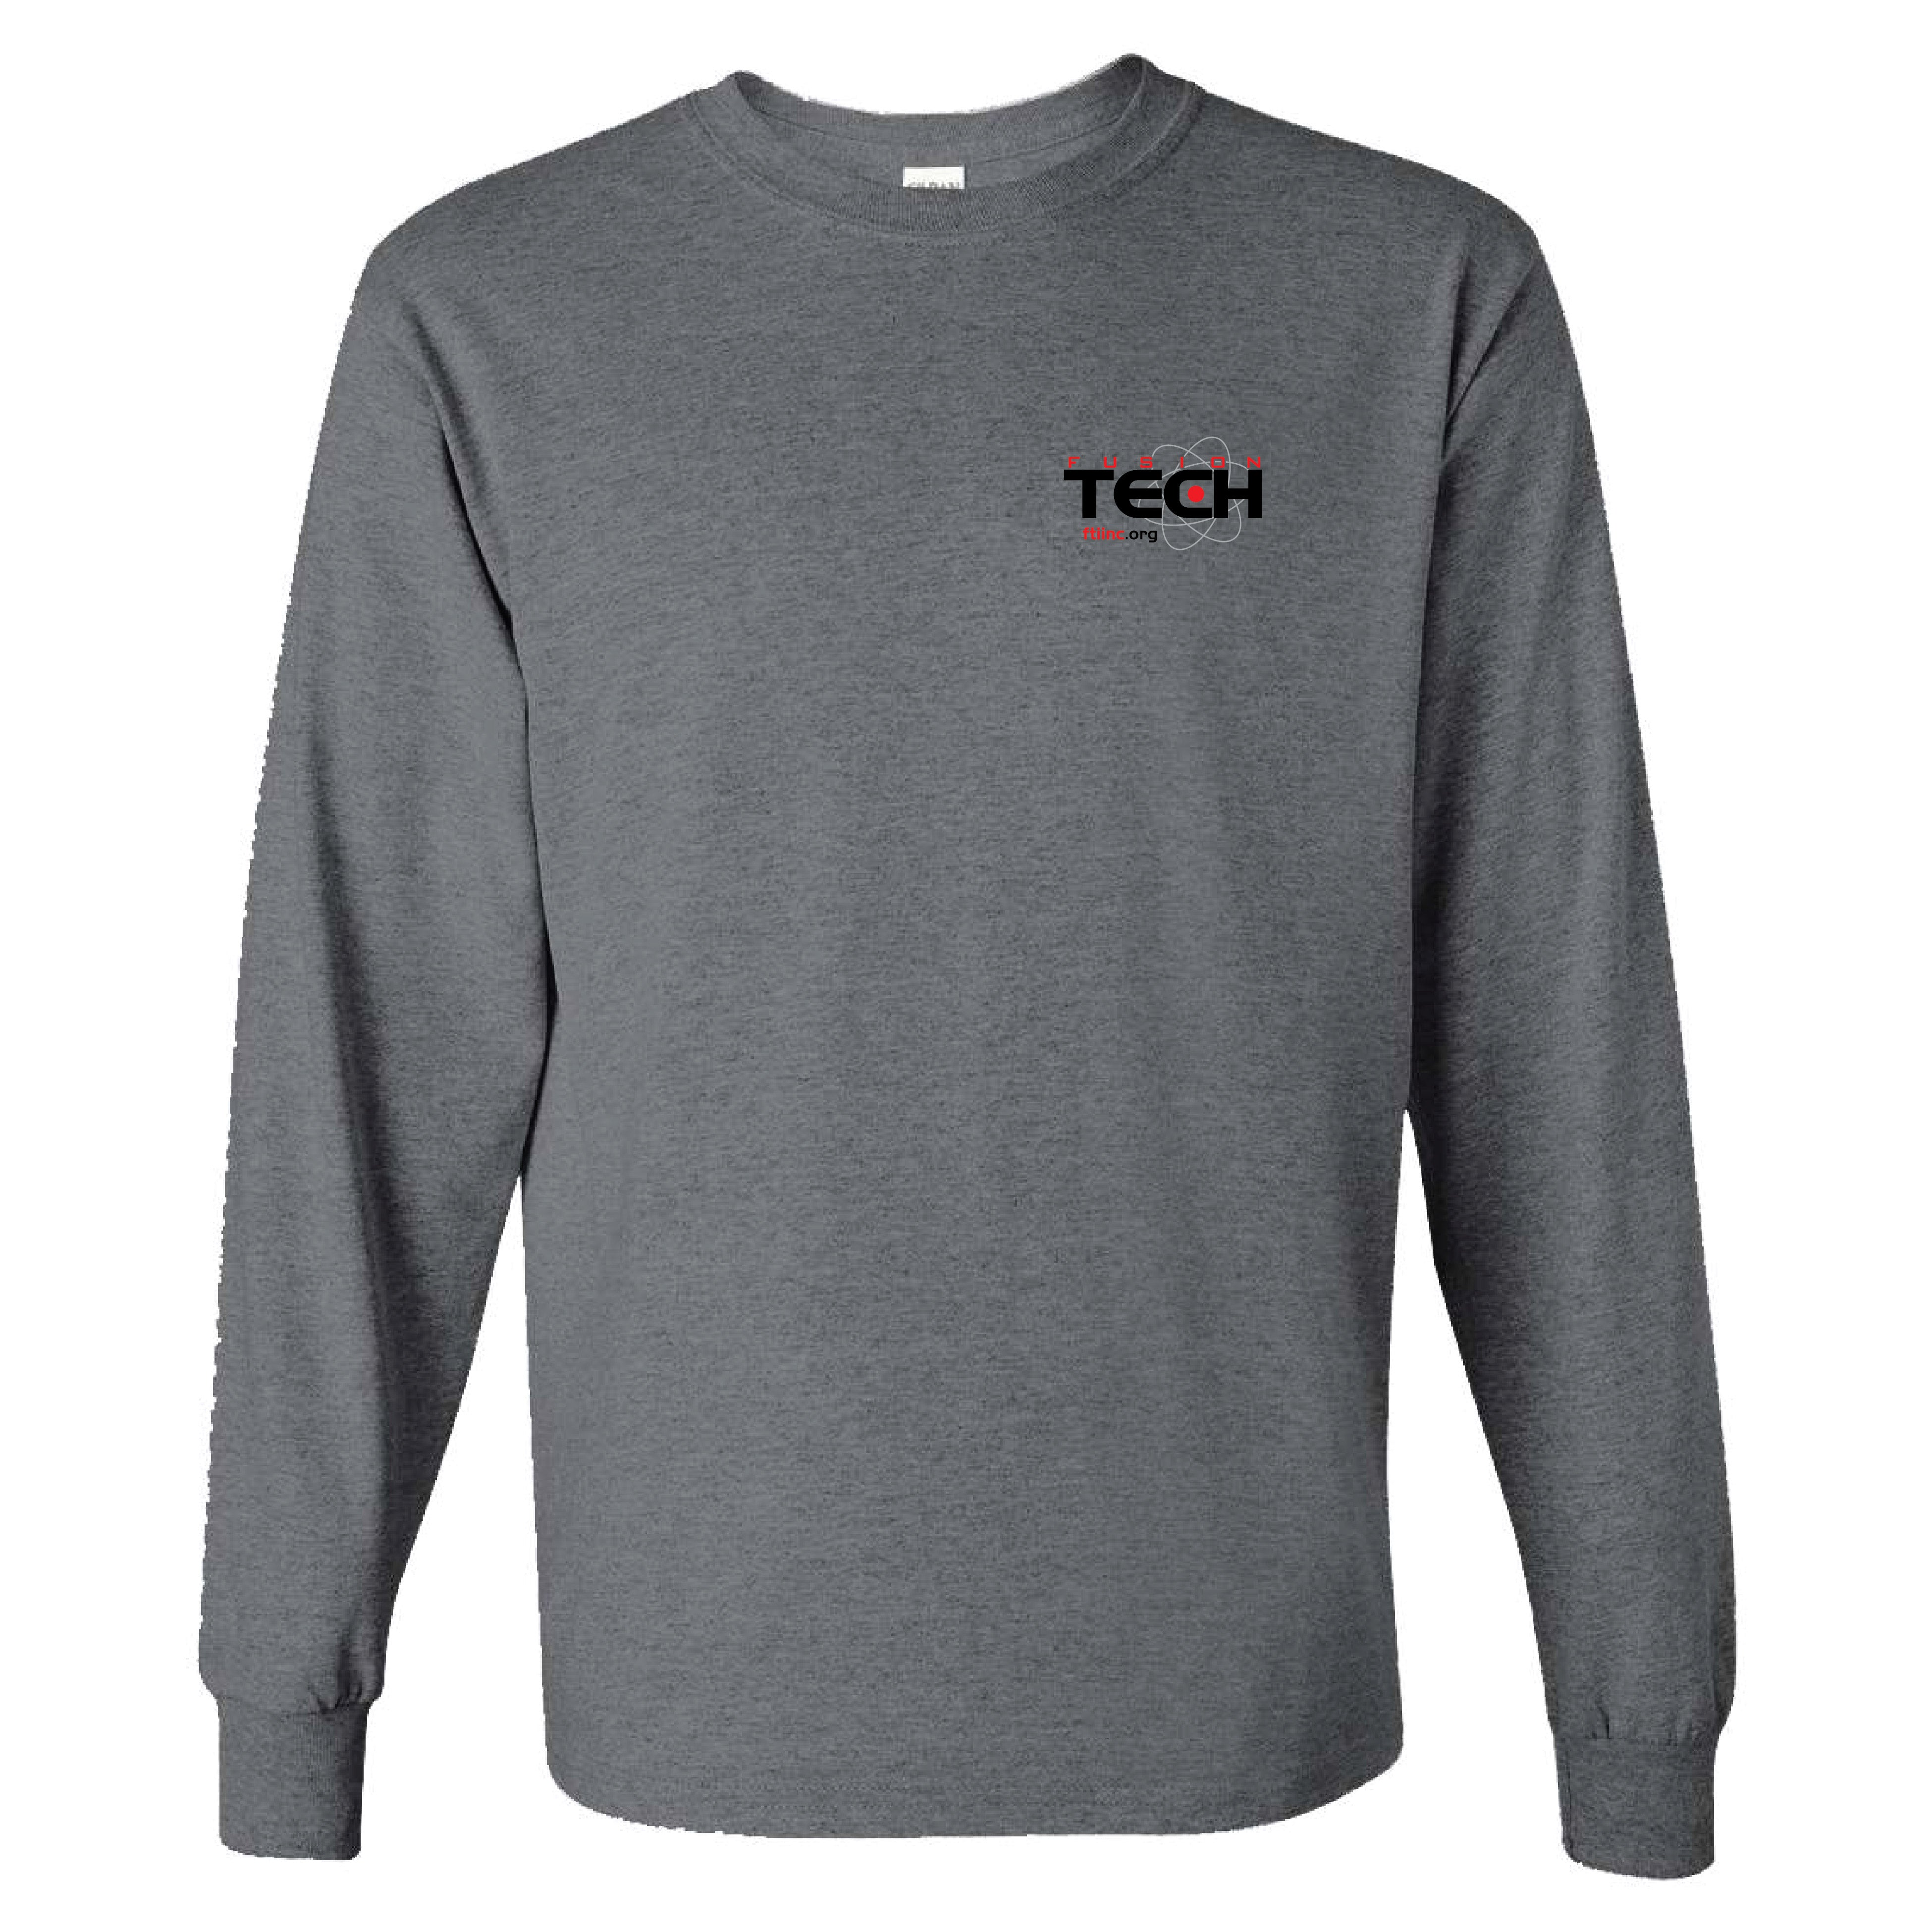 Fusion Tech Embroidered Tall Longsleeve T-Shirt